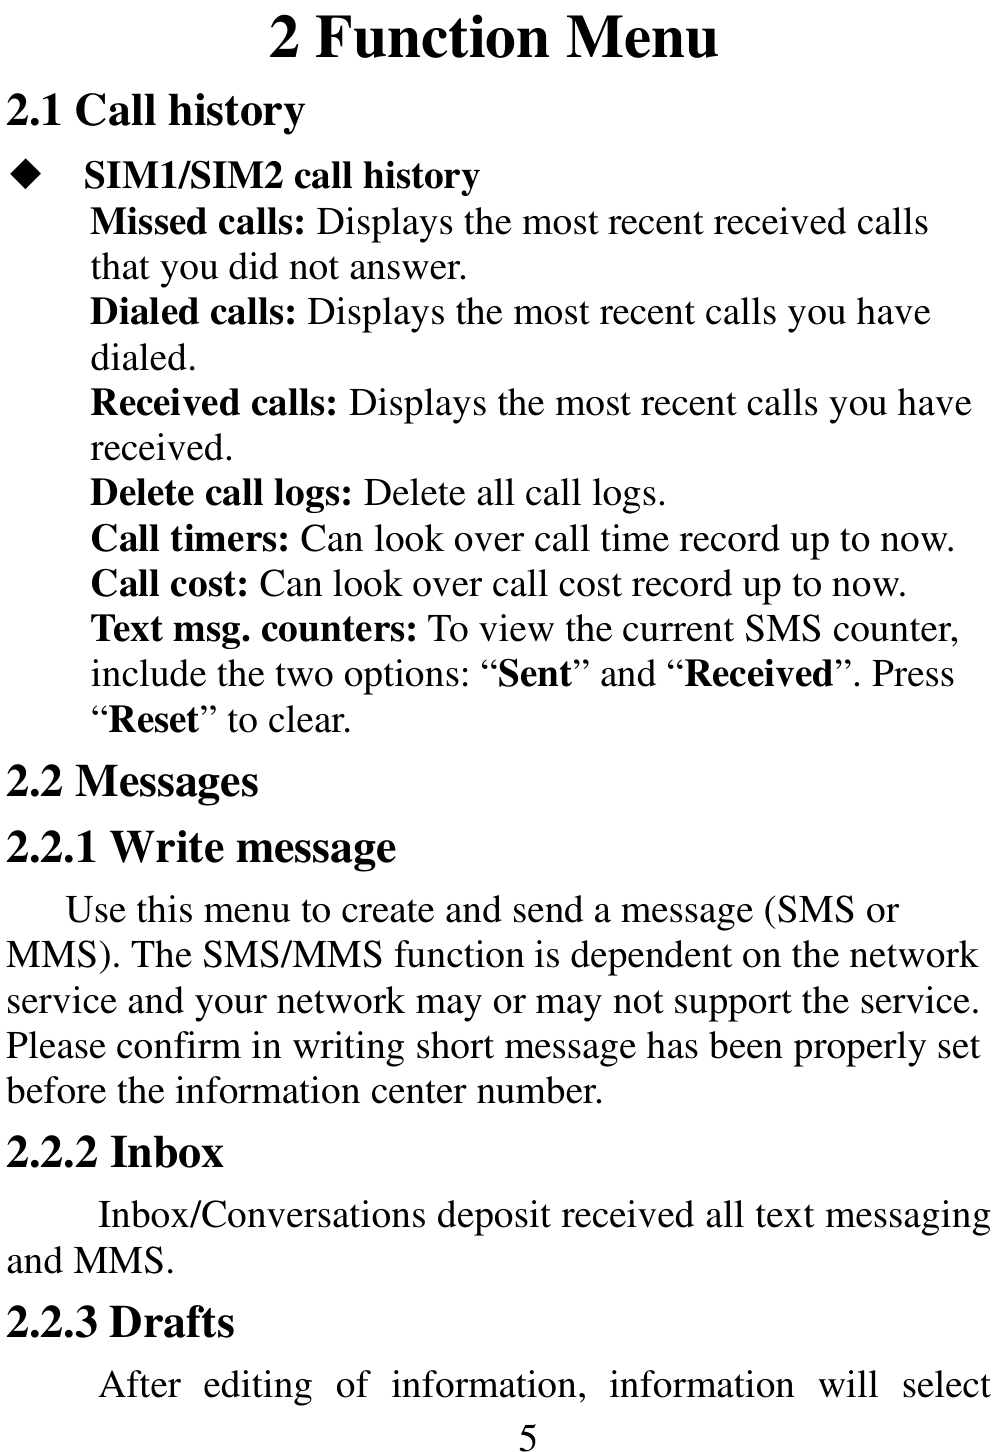                                                      5          2 Function Menu 2.1 Call history ◆ SIM1/SIM2 call history Missed calls: Displays the most recent received calls that you did not answer. Dialed calls: Displays the most recent calls you have dialed. Received calls: Displays the most recent calls you have received. Delete call logs: Delete all call logs. Call timers: Can look over call time record up to now. Call cost: Can look over call cost record up to now. Text msg. counters: To view the current SMS counter, include the two options: “Sent” and “Received”. Press “Reset” to clear. 2.2 Messages 2.2.1 Write message Use this menu to create and send a message (SMS or MMS). The SMS/MMS function is dependent on the network service and your network may or may not support the service. Please confirm in writing short message has been properly set before the information center number. 2.2.2 Inbox Inbox/Conversations deposit received all text messaging and MMS.   2.2.3 Drafts After  editing  of  information,  information  will  select 